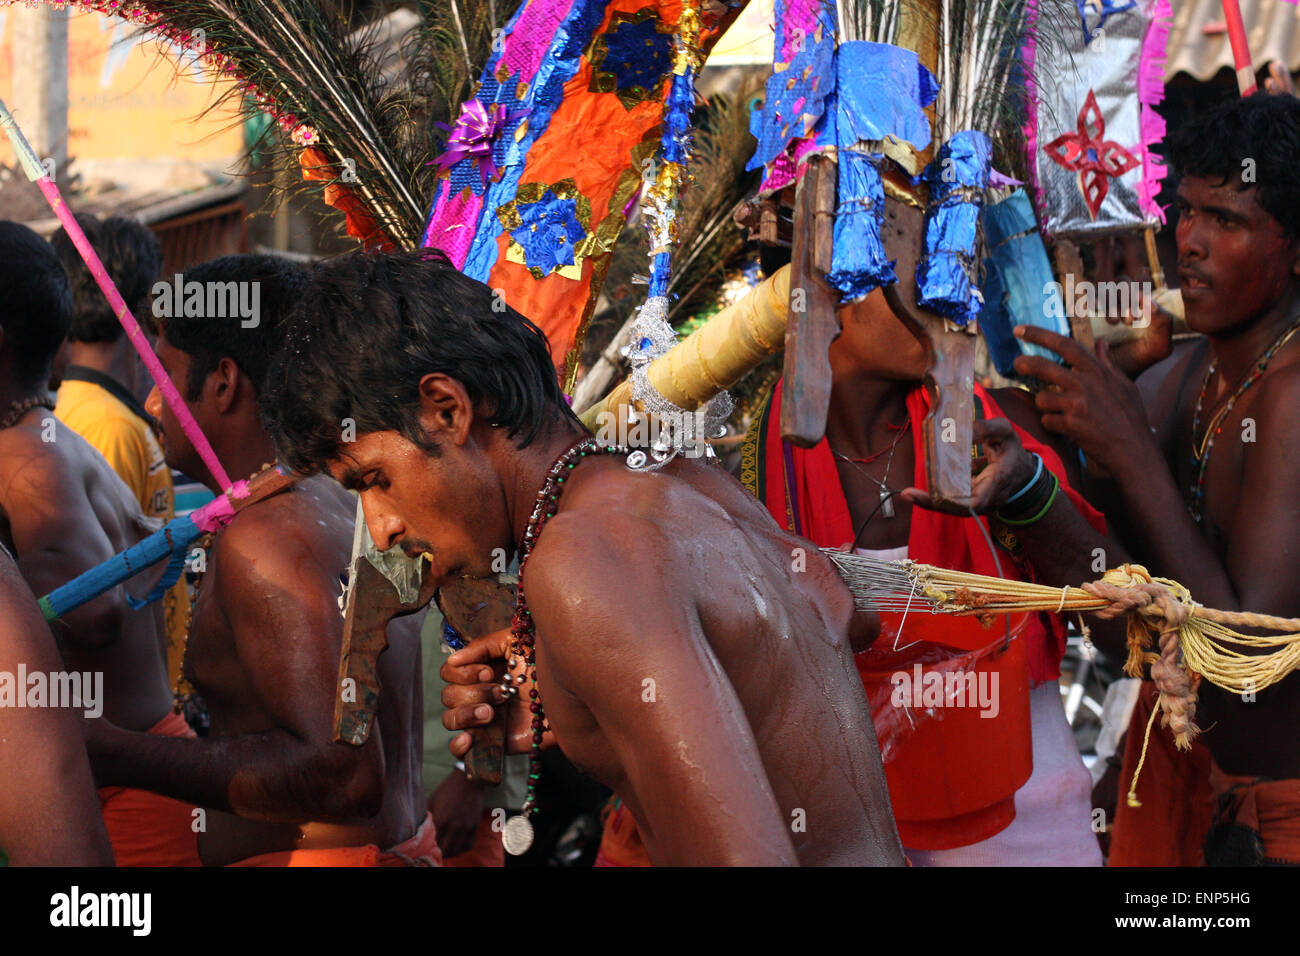 Tamil Hindu procession including man with hooks in his back to enact his religious devotion, near Trincomalee, Sri Lanka Stock Photo